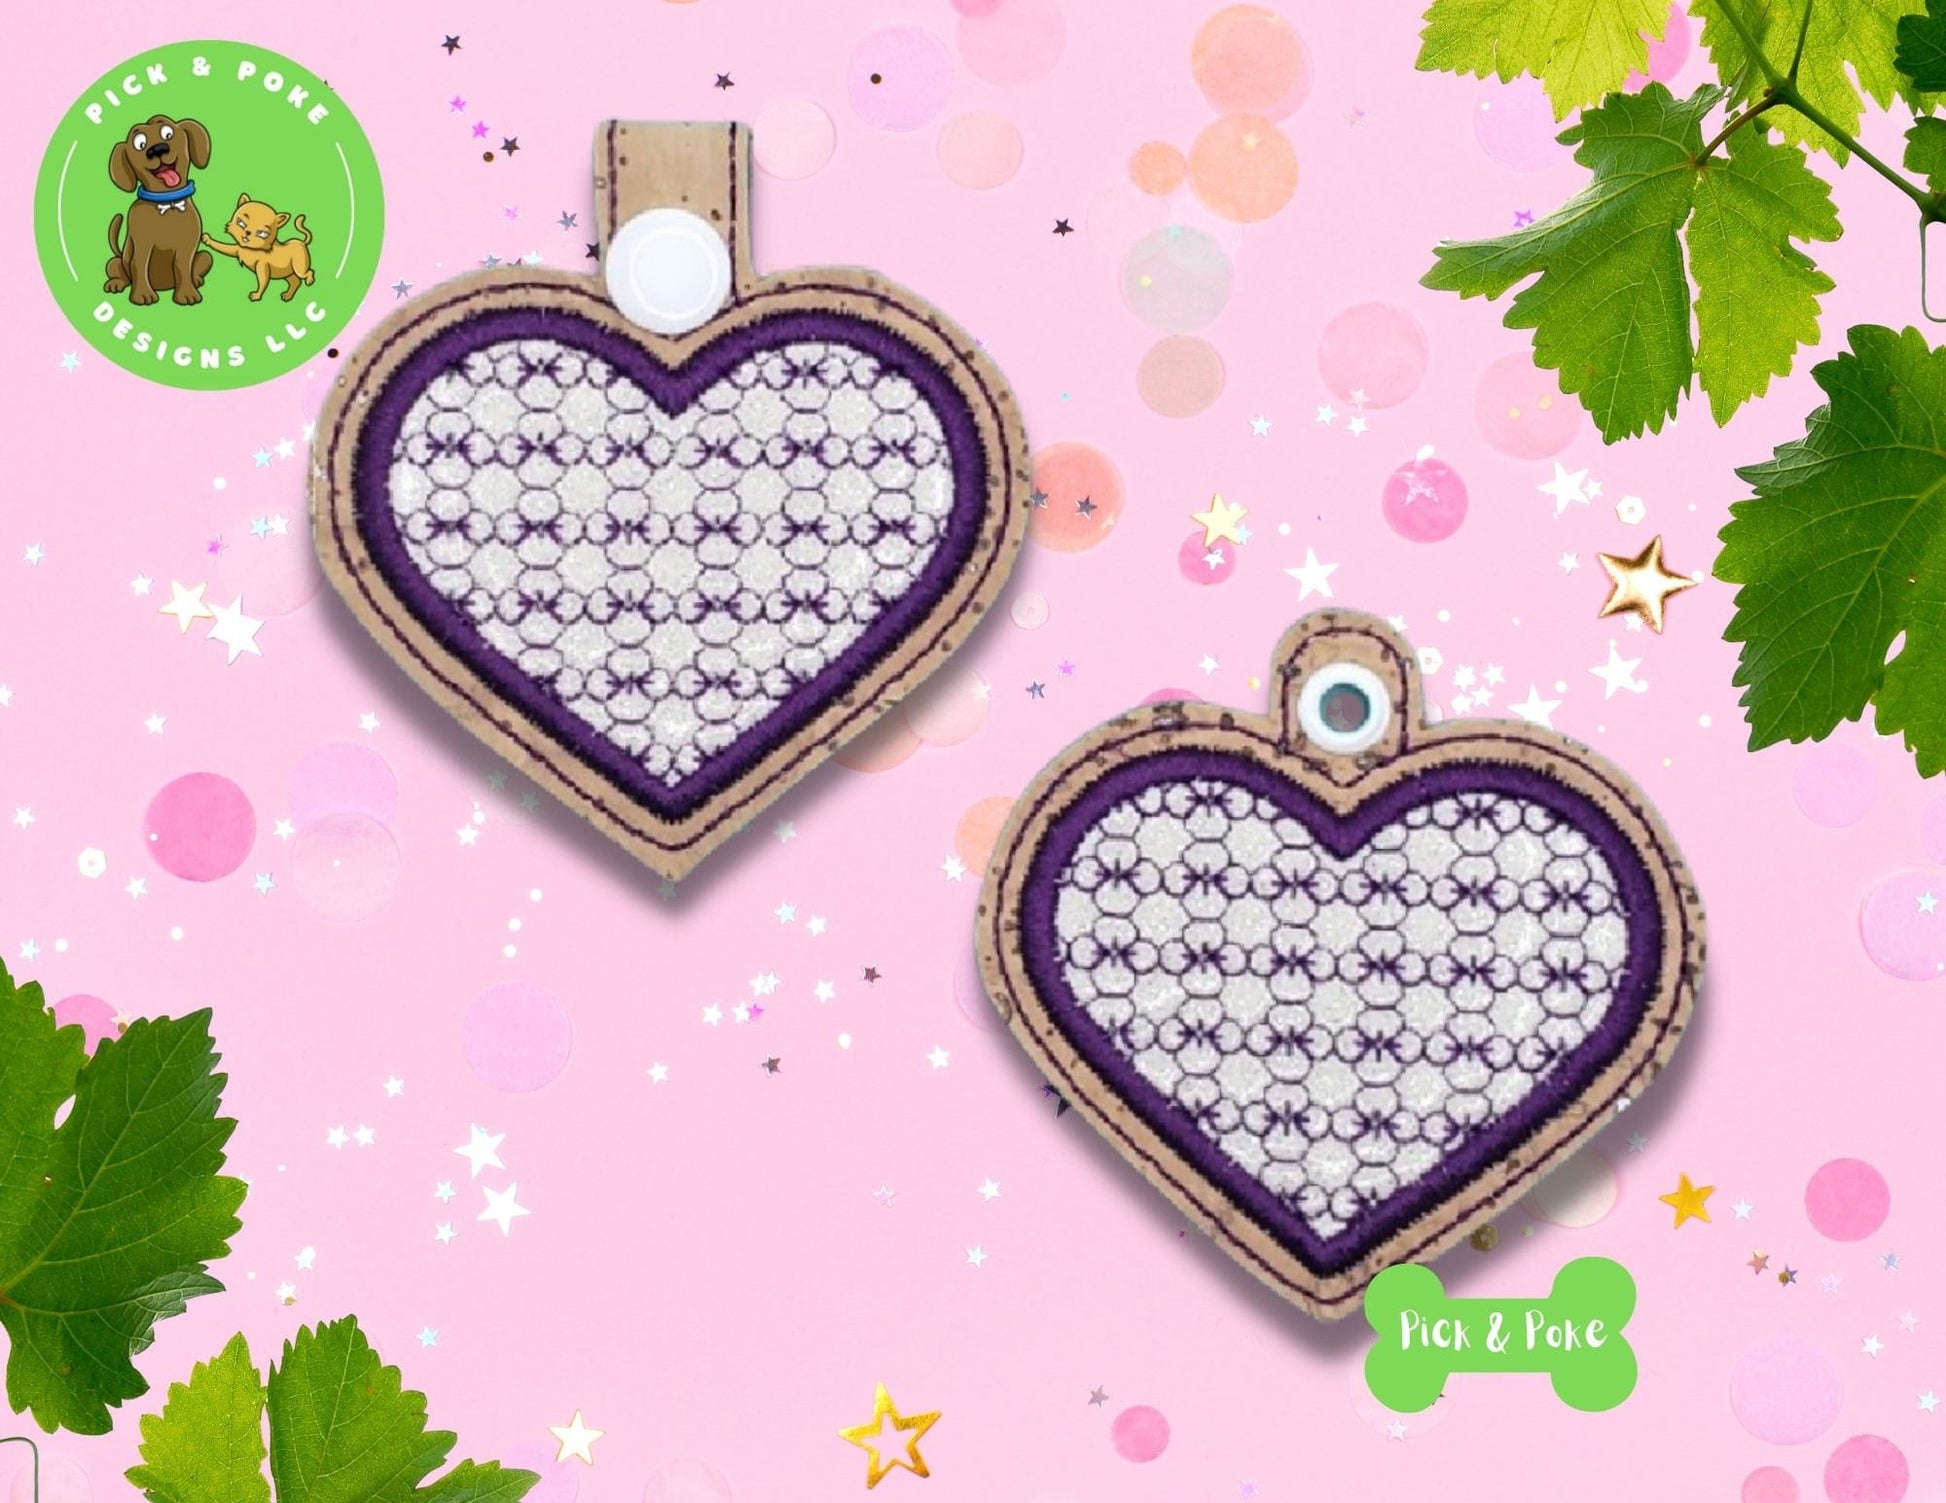 In the Hoop Embroidery Project / Applique Heart with Motif Snap Tab and Eyelet Key Fob / Gift Tag / Digital File / Instant DOWNLOAD / SetPick and Poke Designs